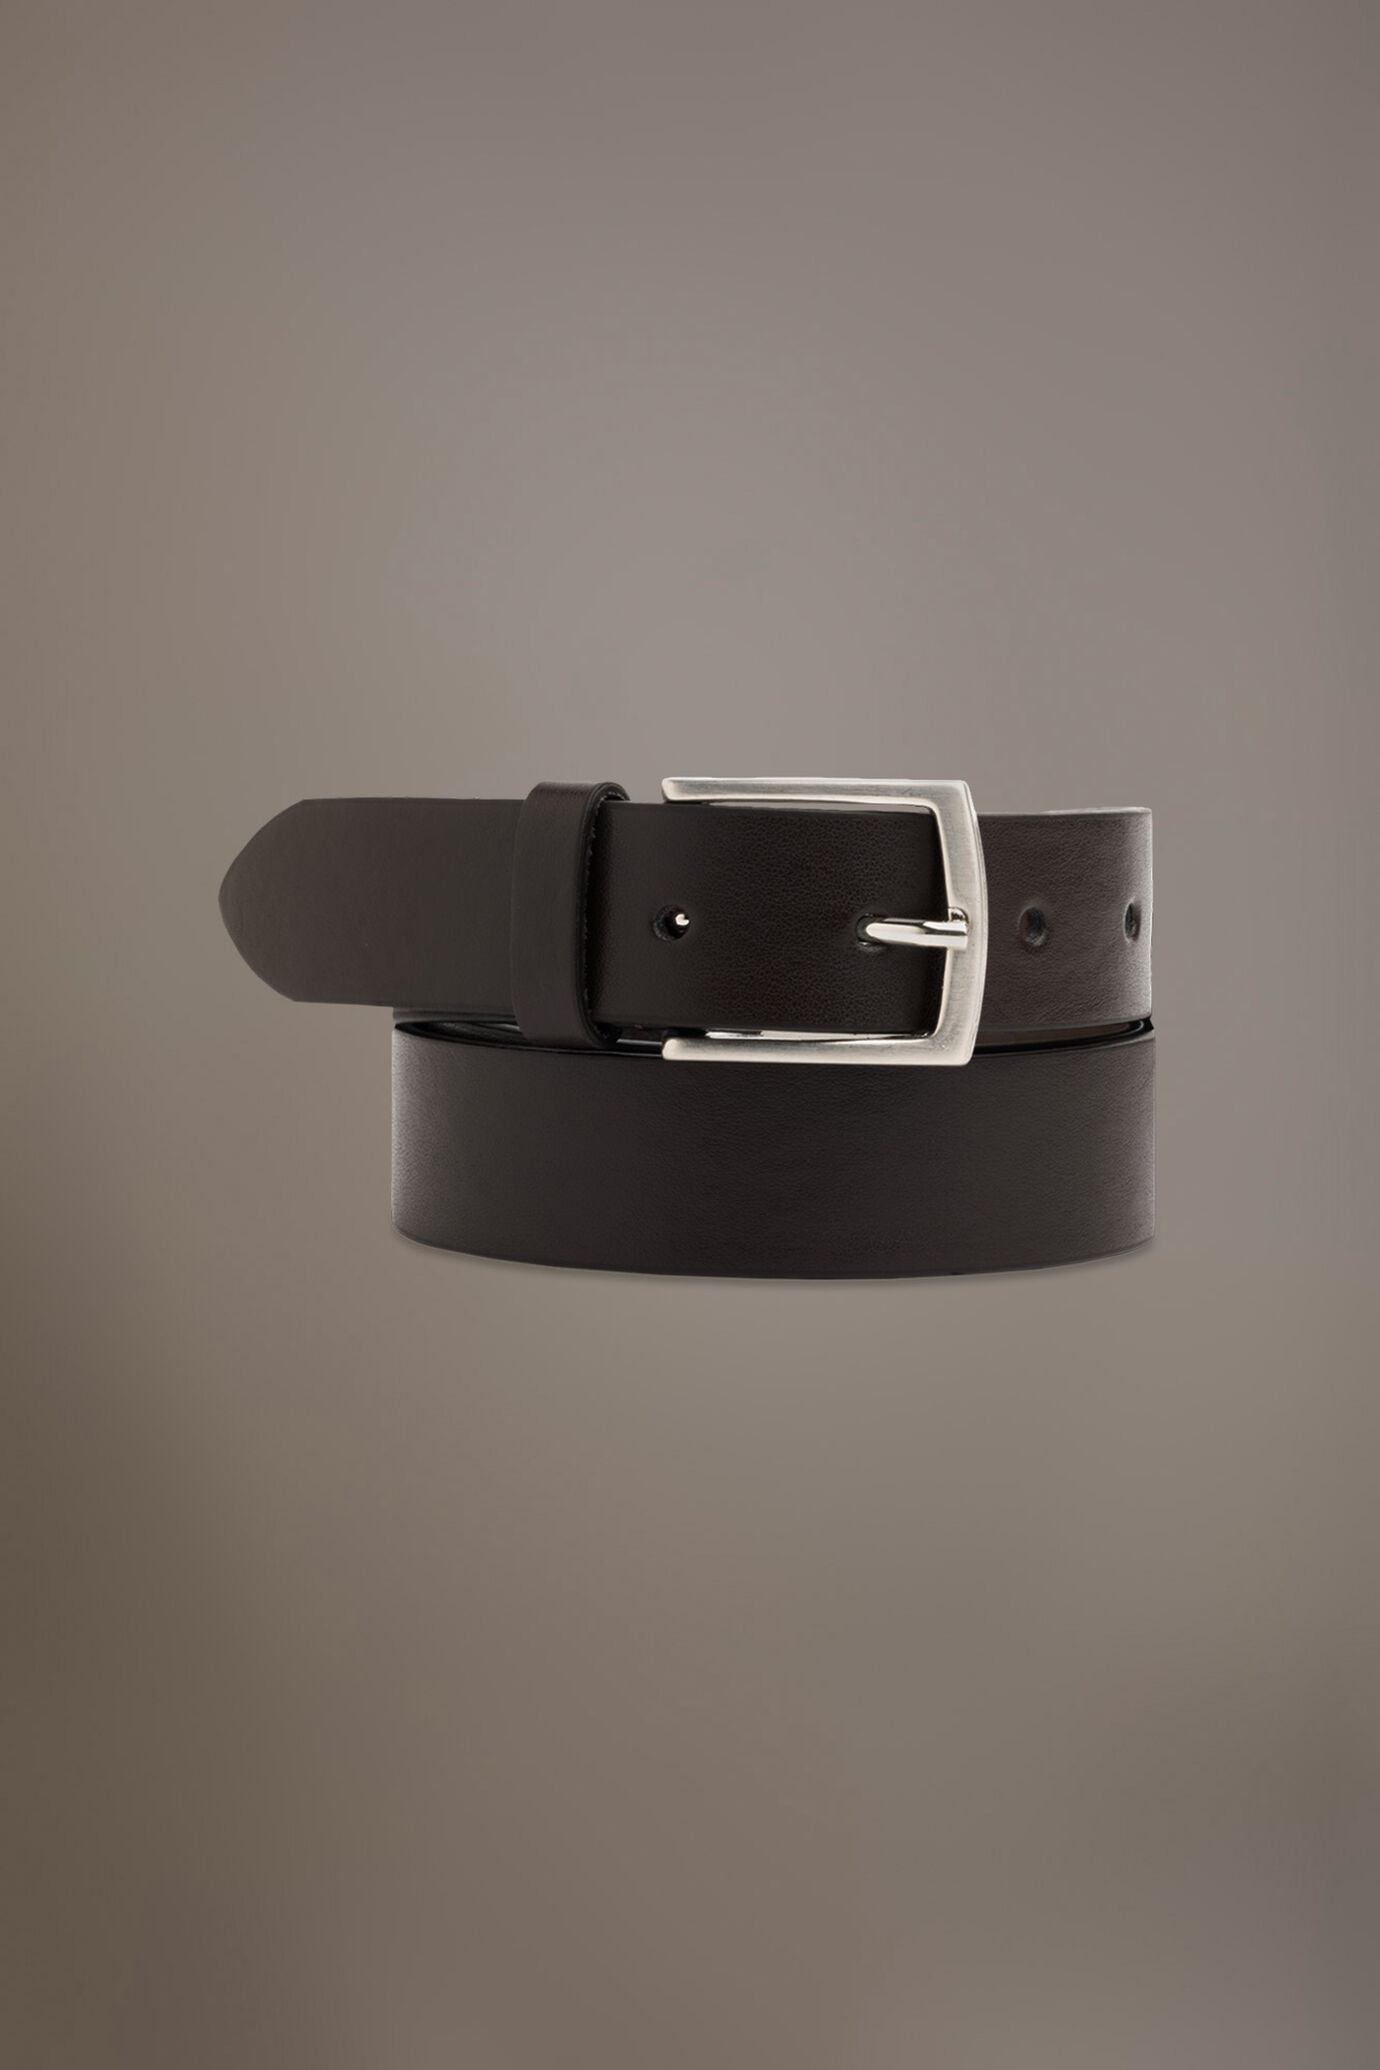 Classic belt made in italy